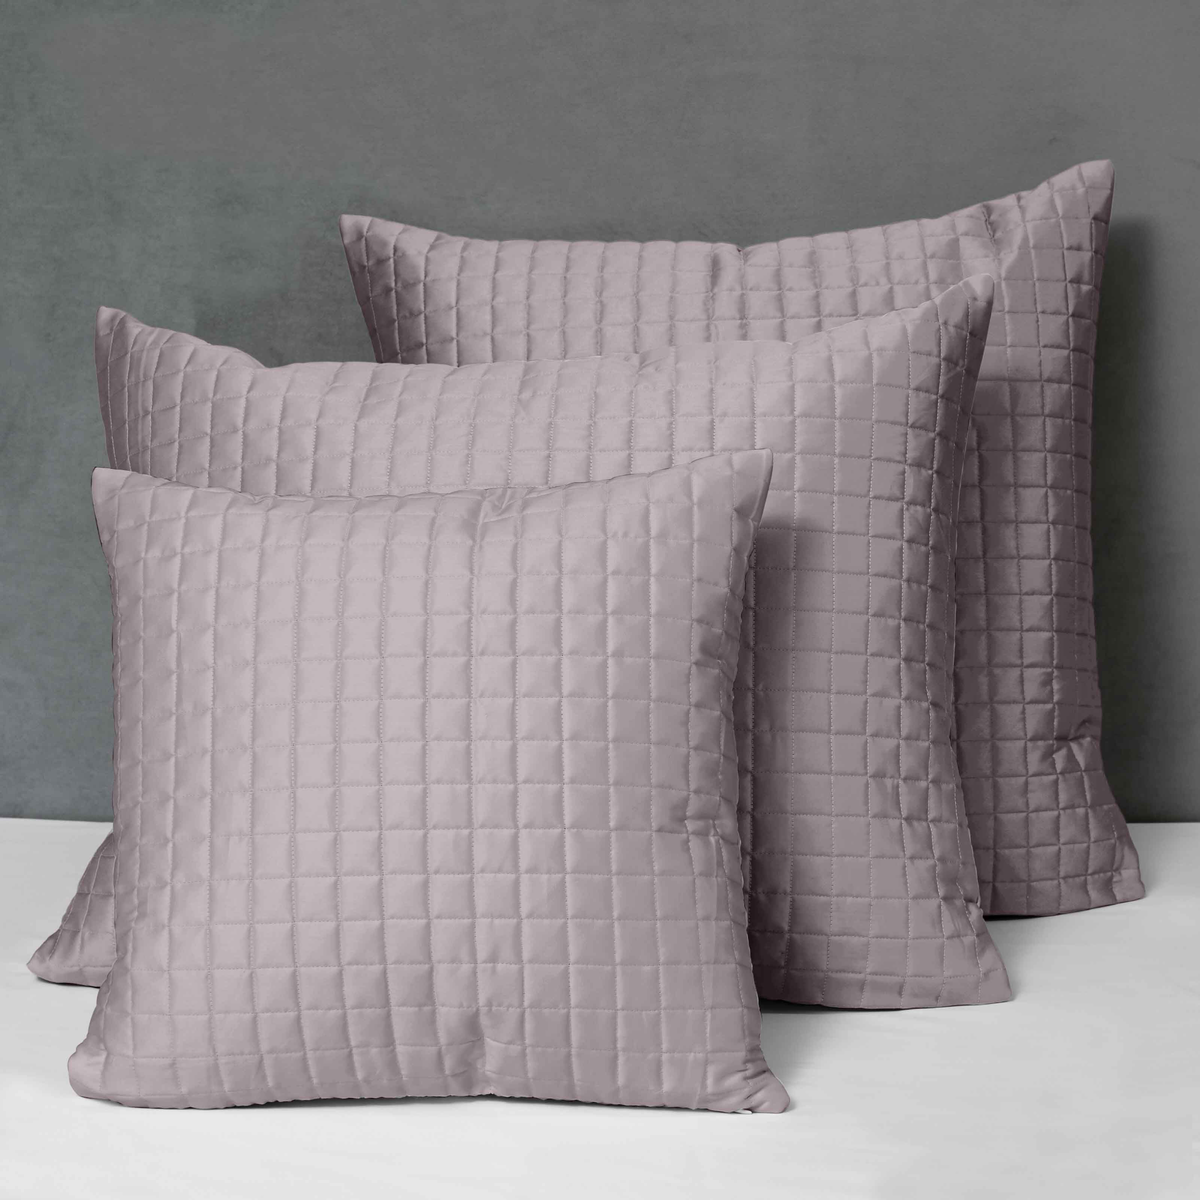 Different Sizes of Quilted Shams of Signoria Masaccio Bedding in Thistle  Color